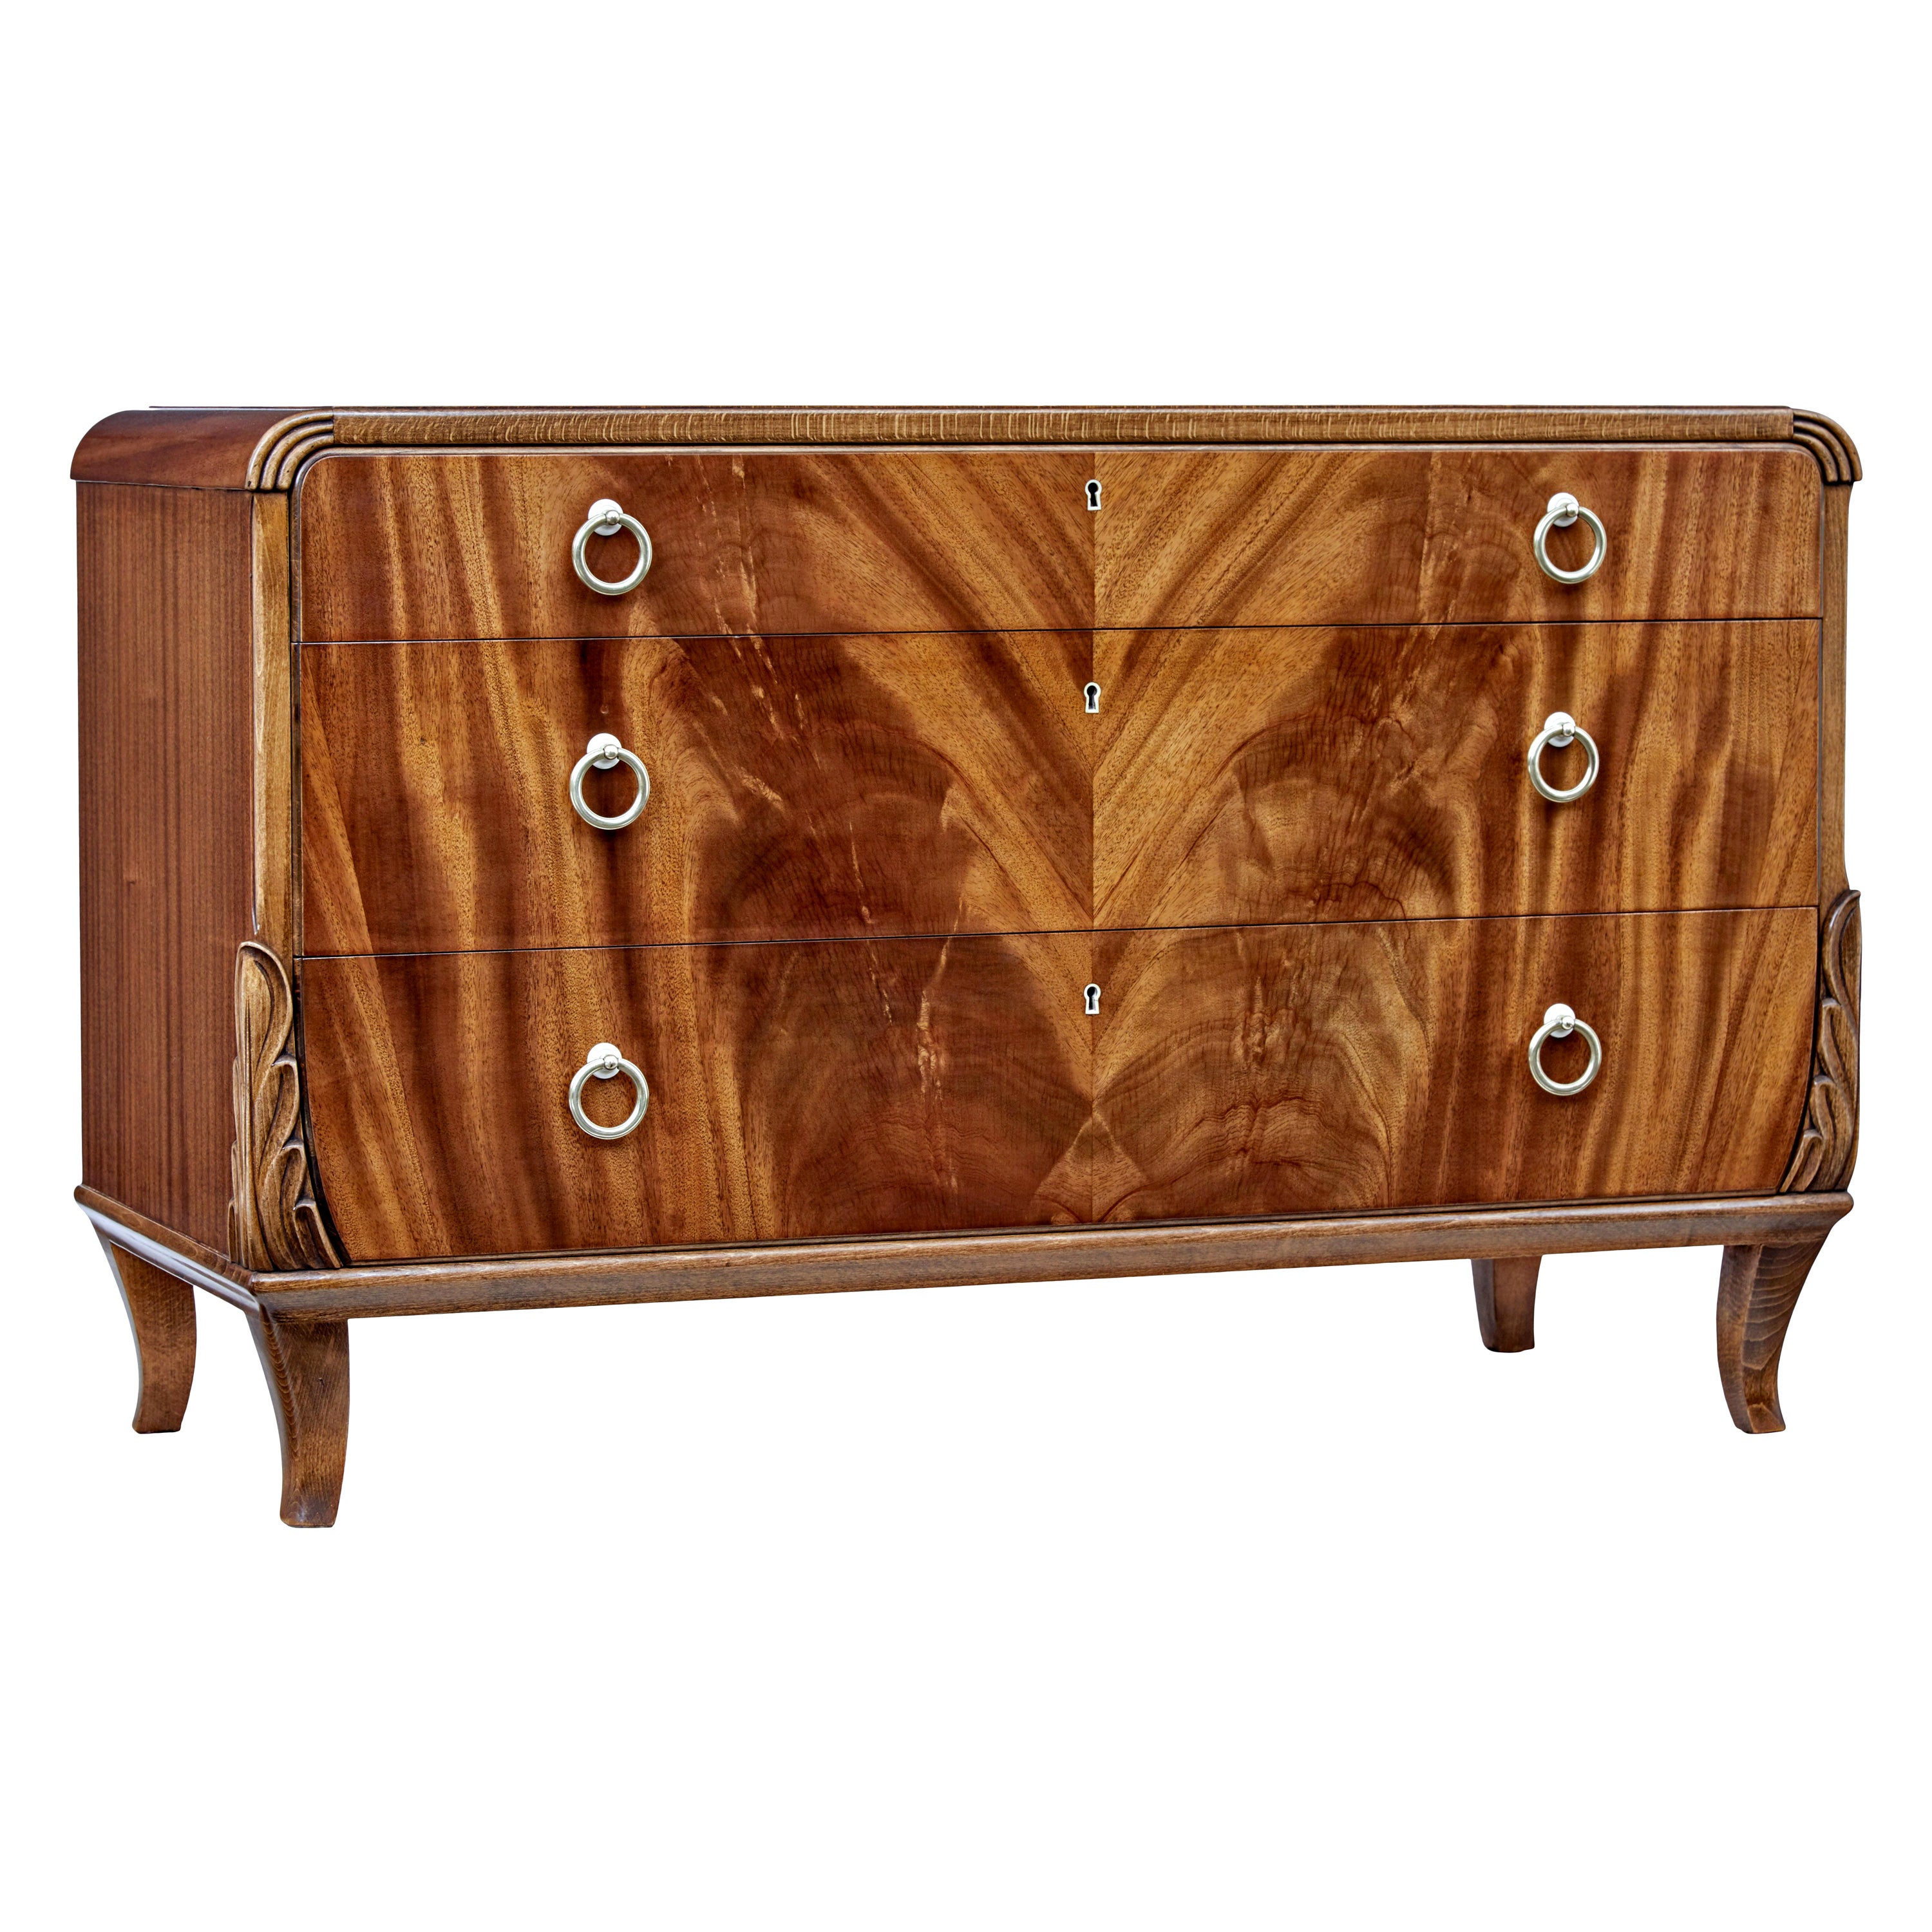 Mid 20th century mahogany chest of drawers by Bodafors For Sale